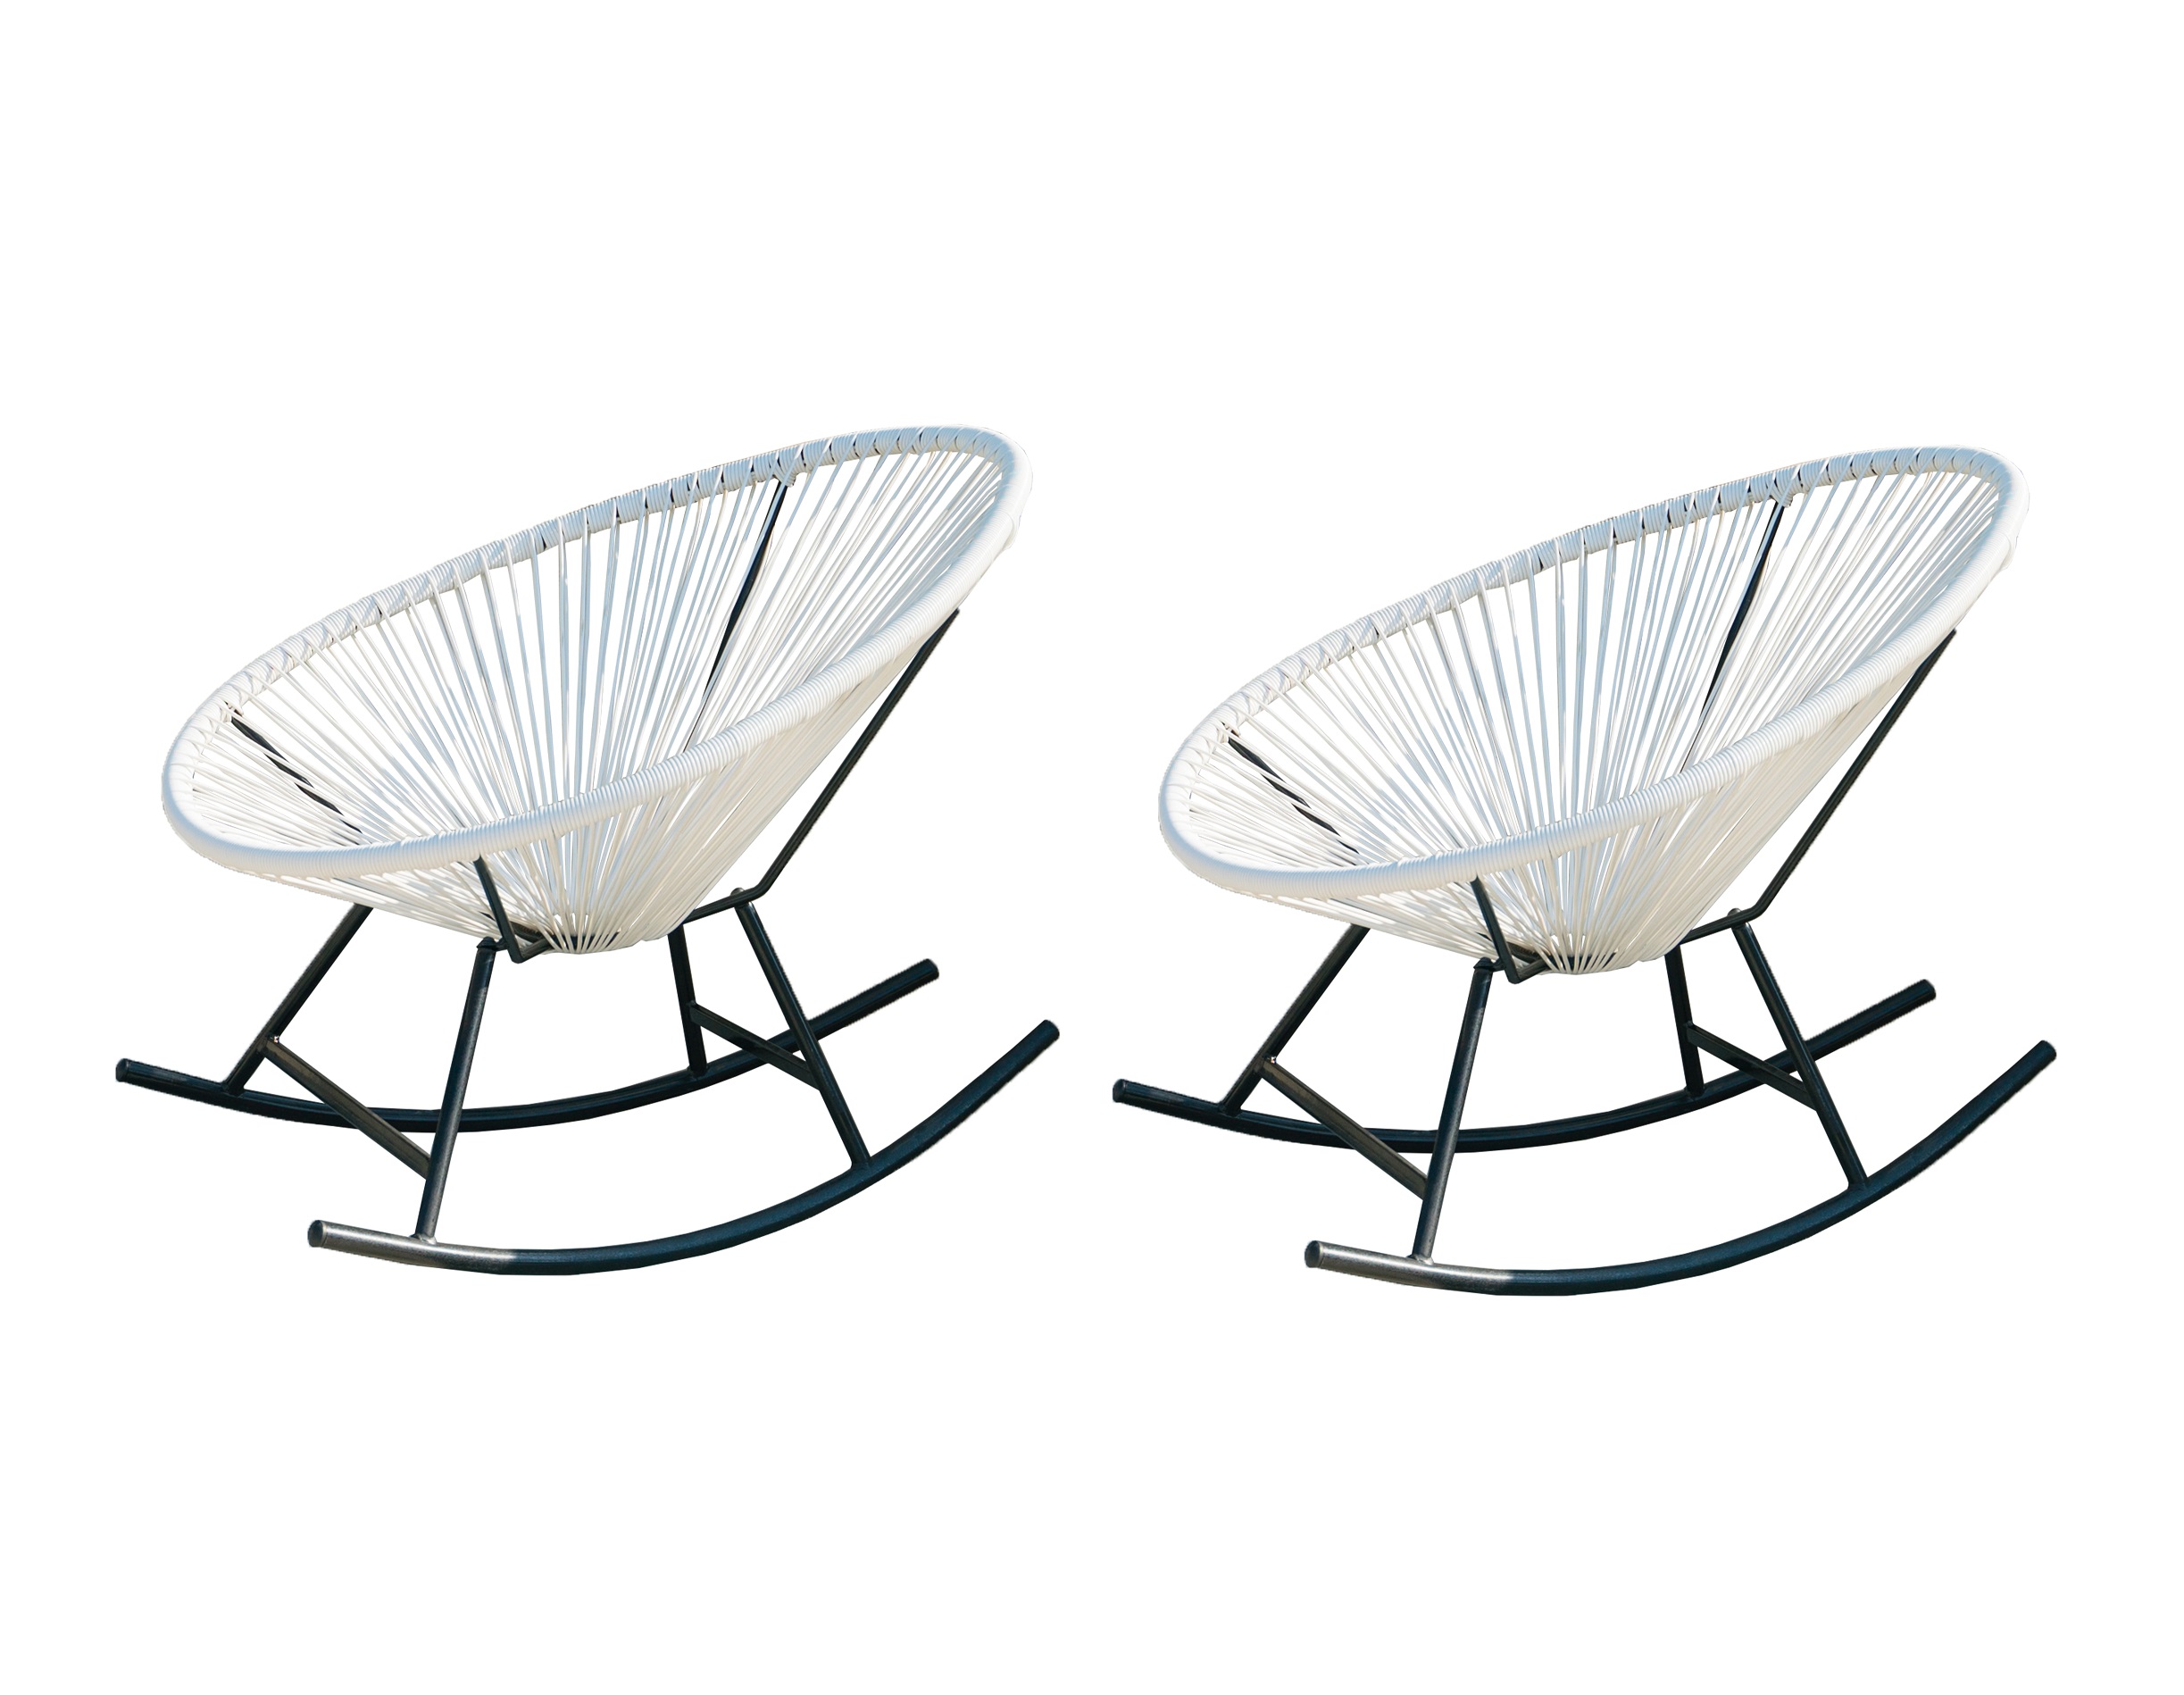 Elevate your space with our modern set of 2 rocking chairs. Versatile indoor/outdoor chairs with weather-resistant design. Discover comfort and style!